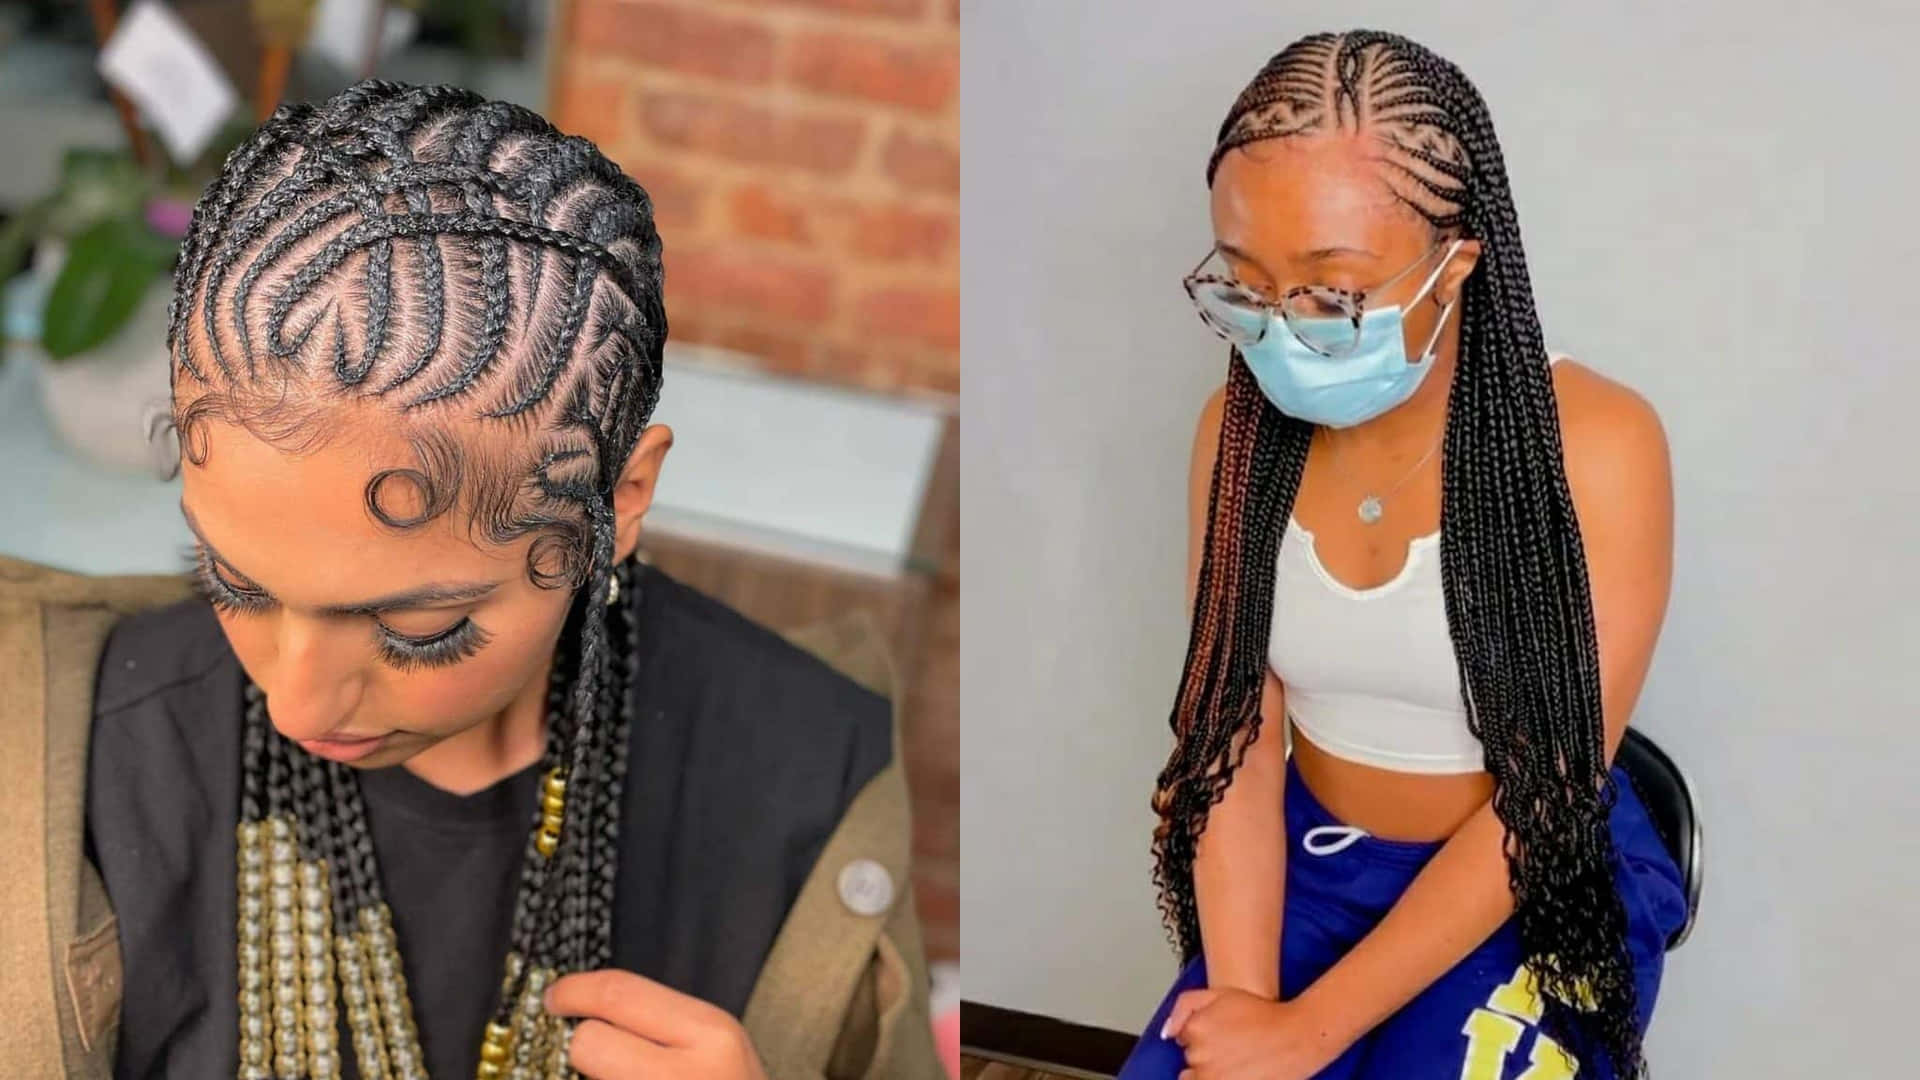 Two Pictures Of A Woman With Braids